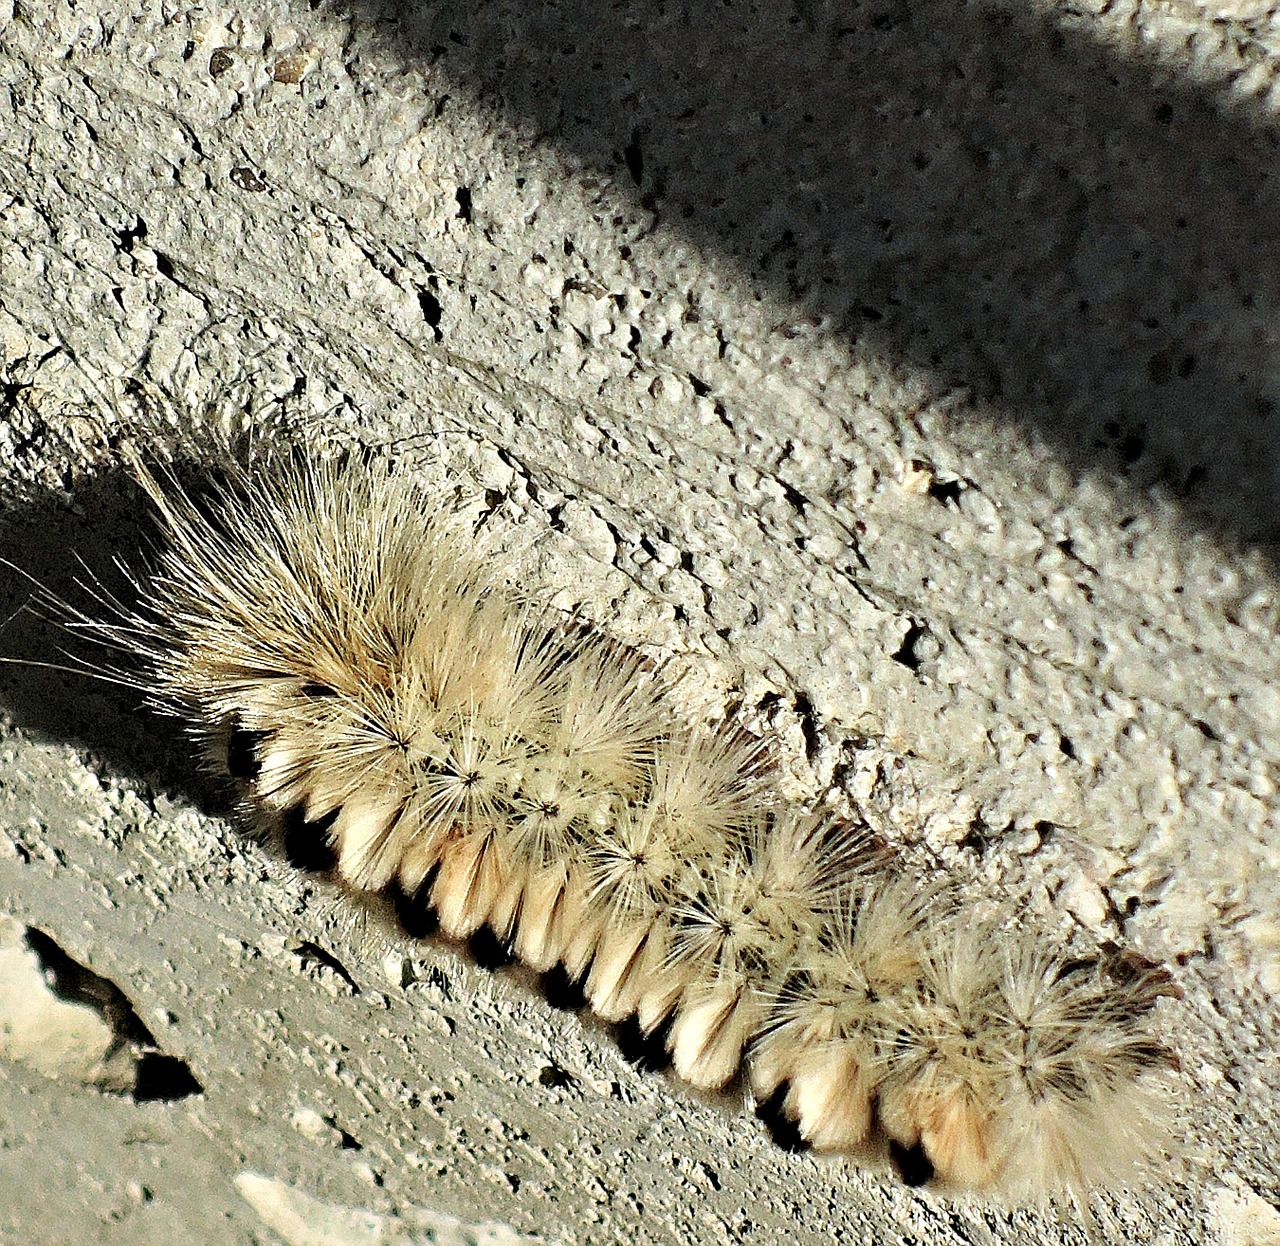 hickory tussock poisonous caterpillar insect free photo